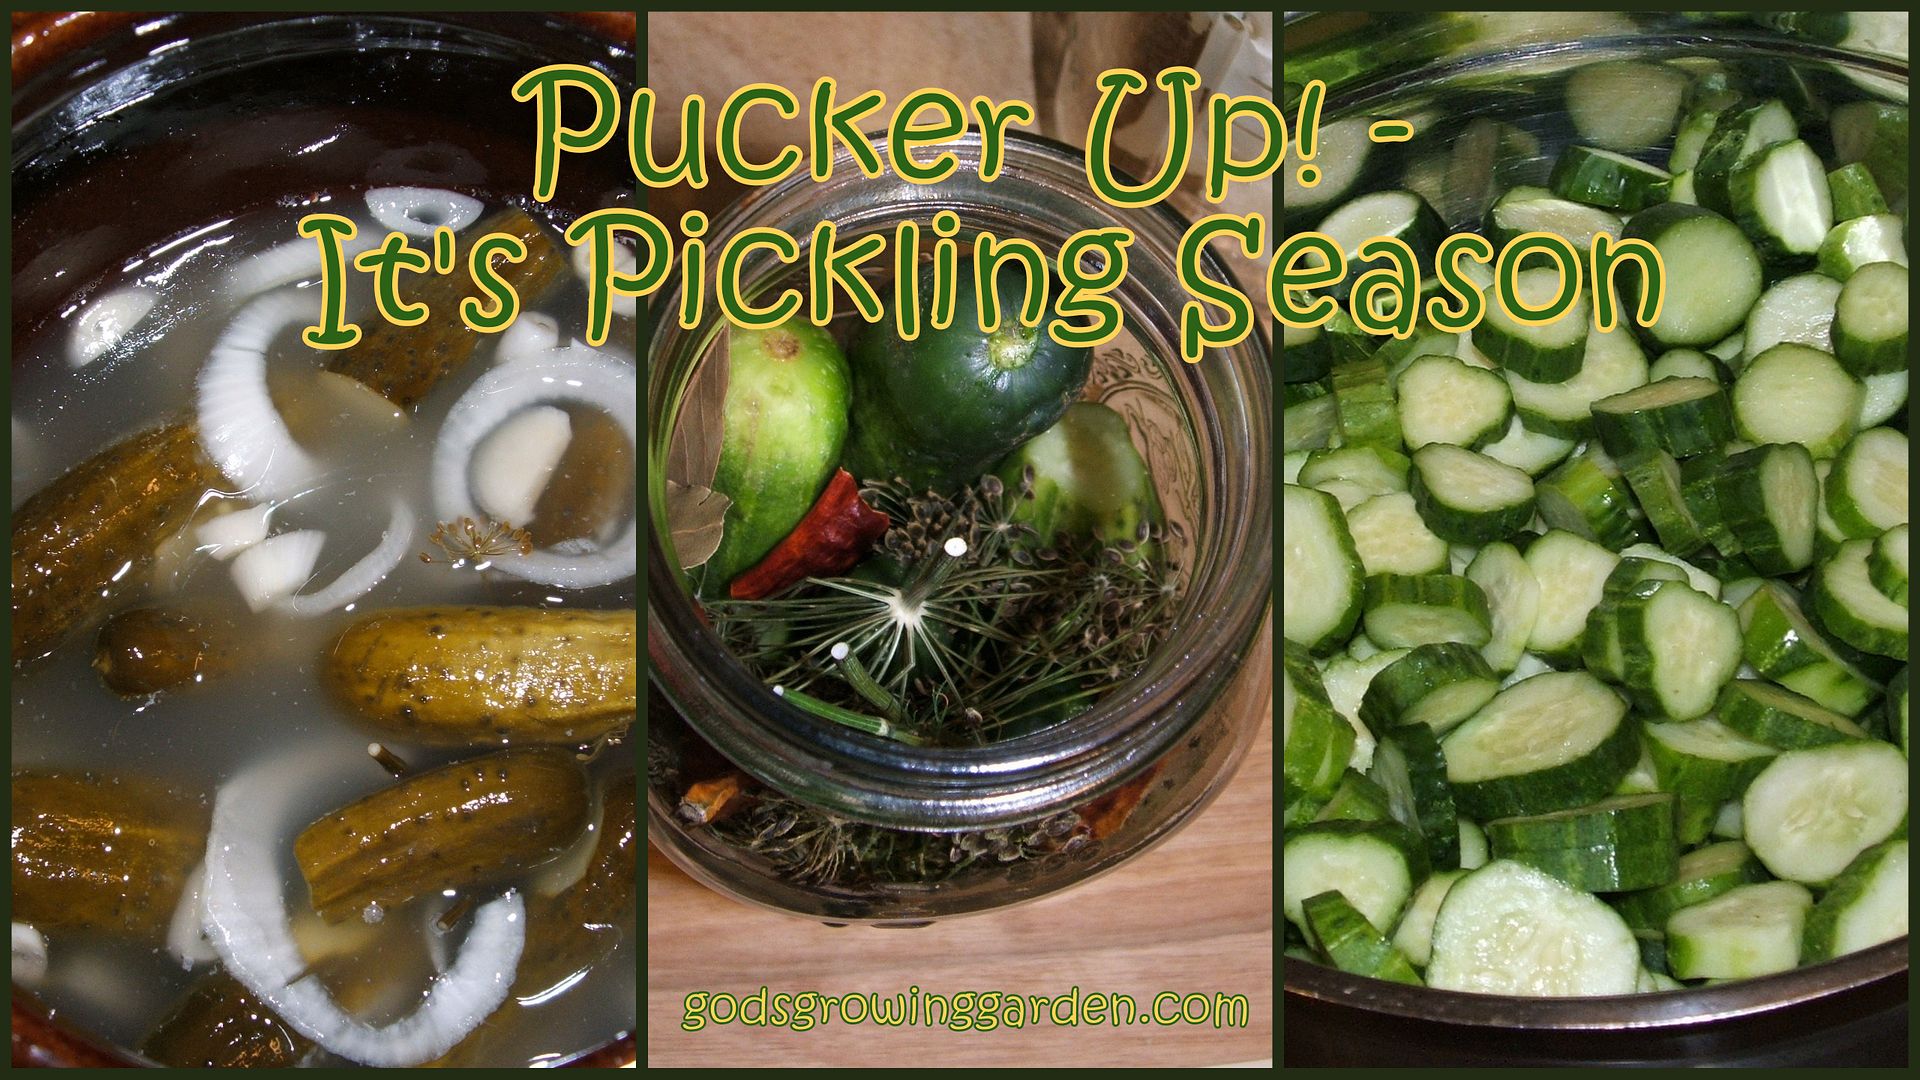 Pickles by Angie Ouellette-Tower for godsgrowinggarden.com photo BlogStuff_zpsc34aae84.jpg